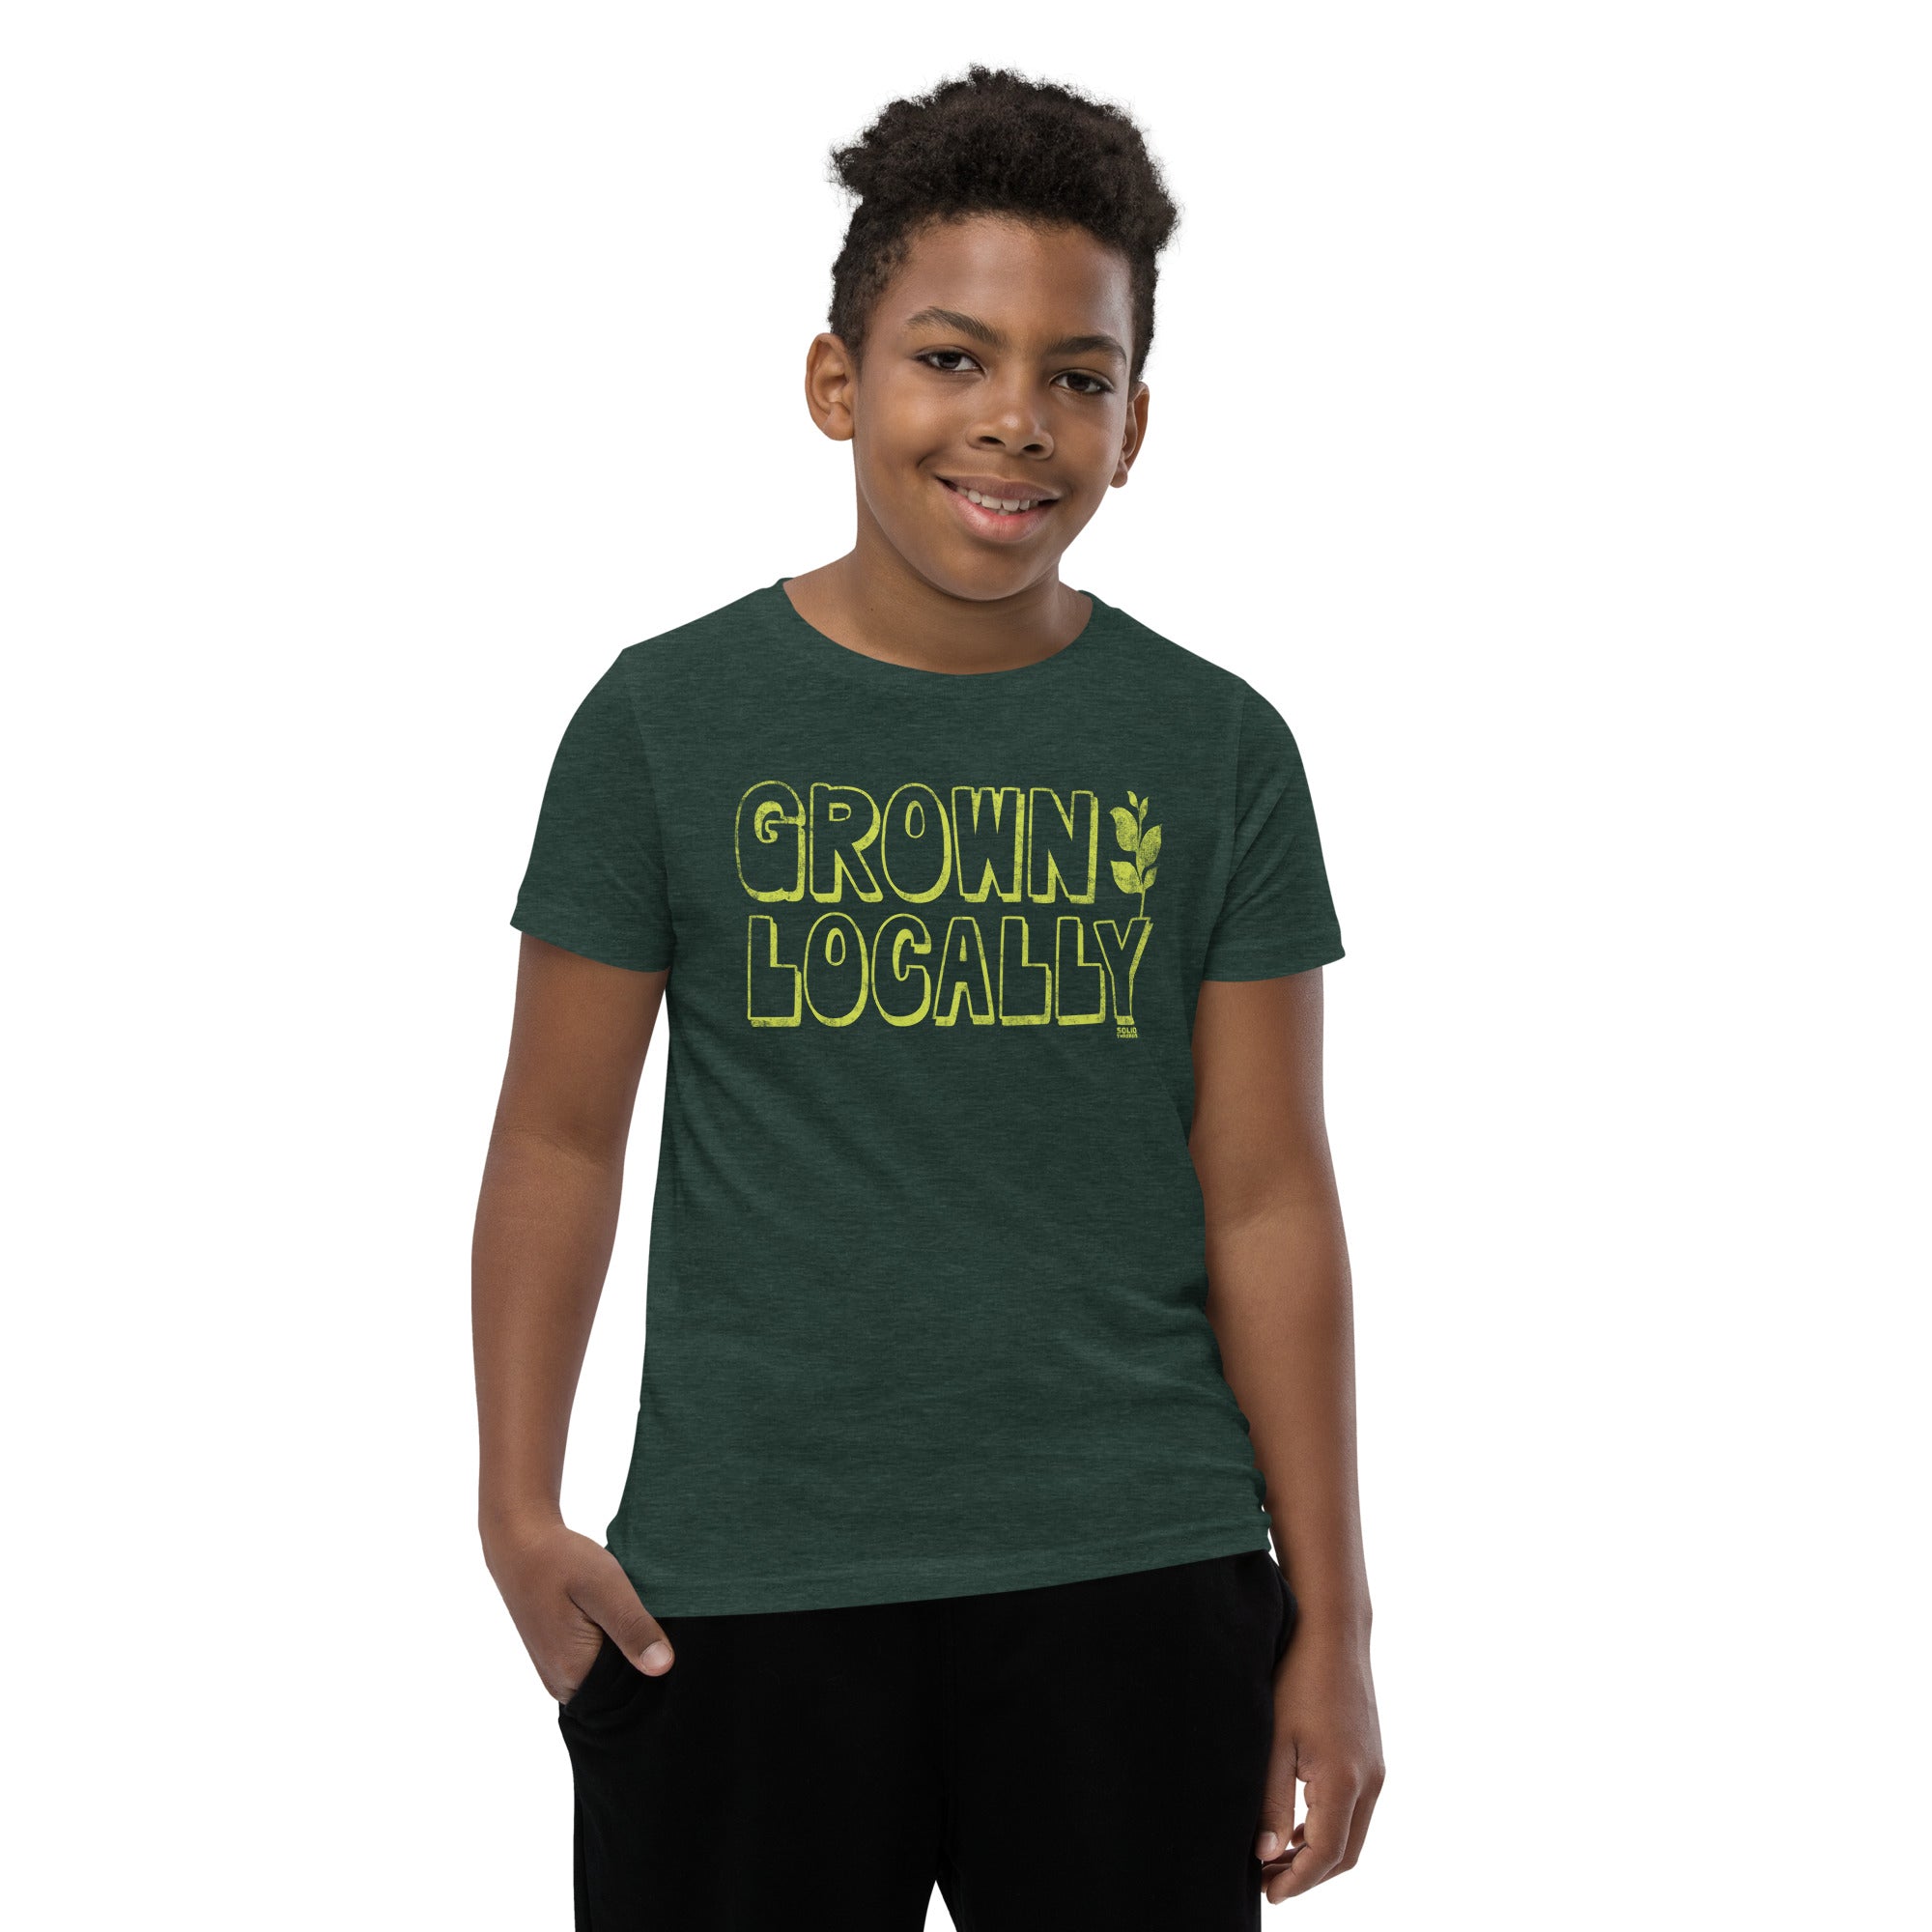 Youth Grown Locally Cool Extra Soft T-Shirt | Retro Farm To Table Kids Tee Boy Model | Solid Threads